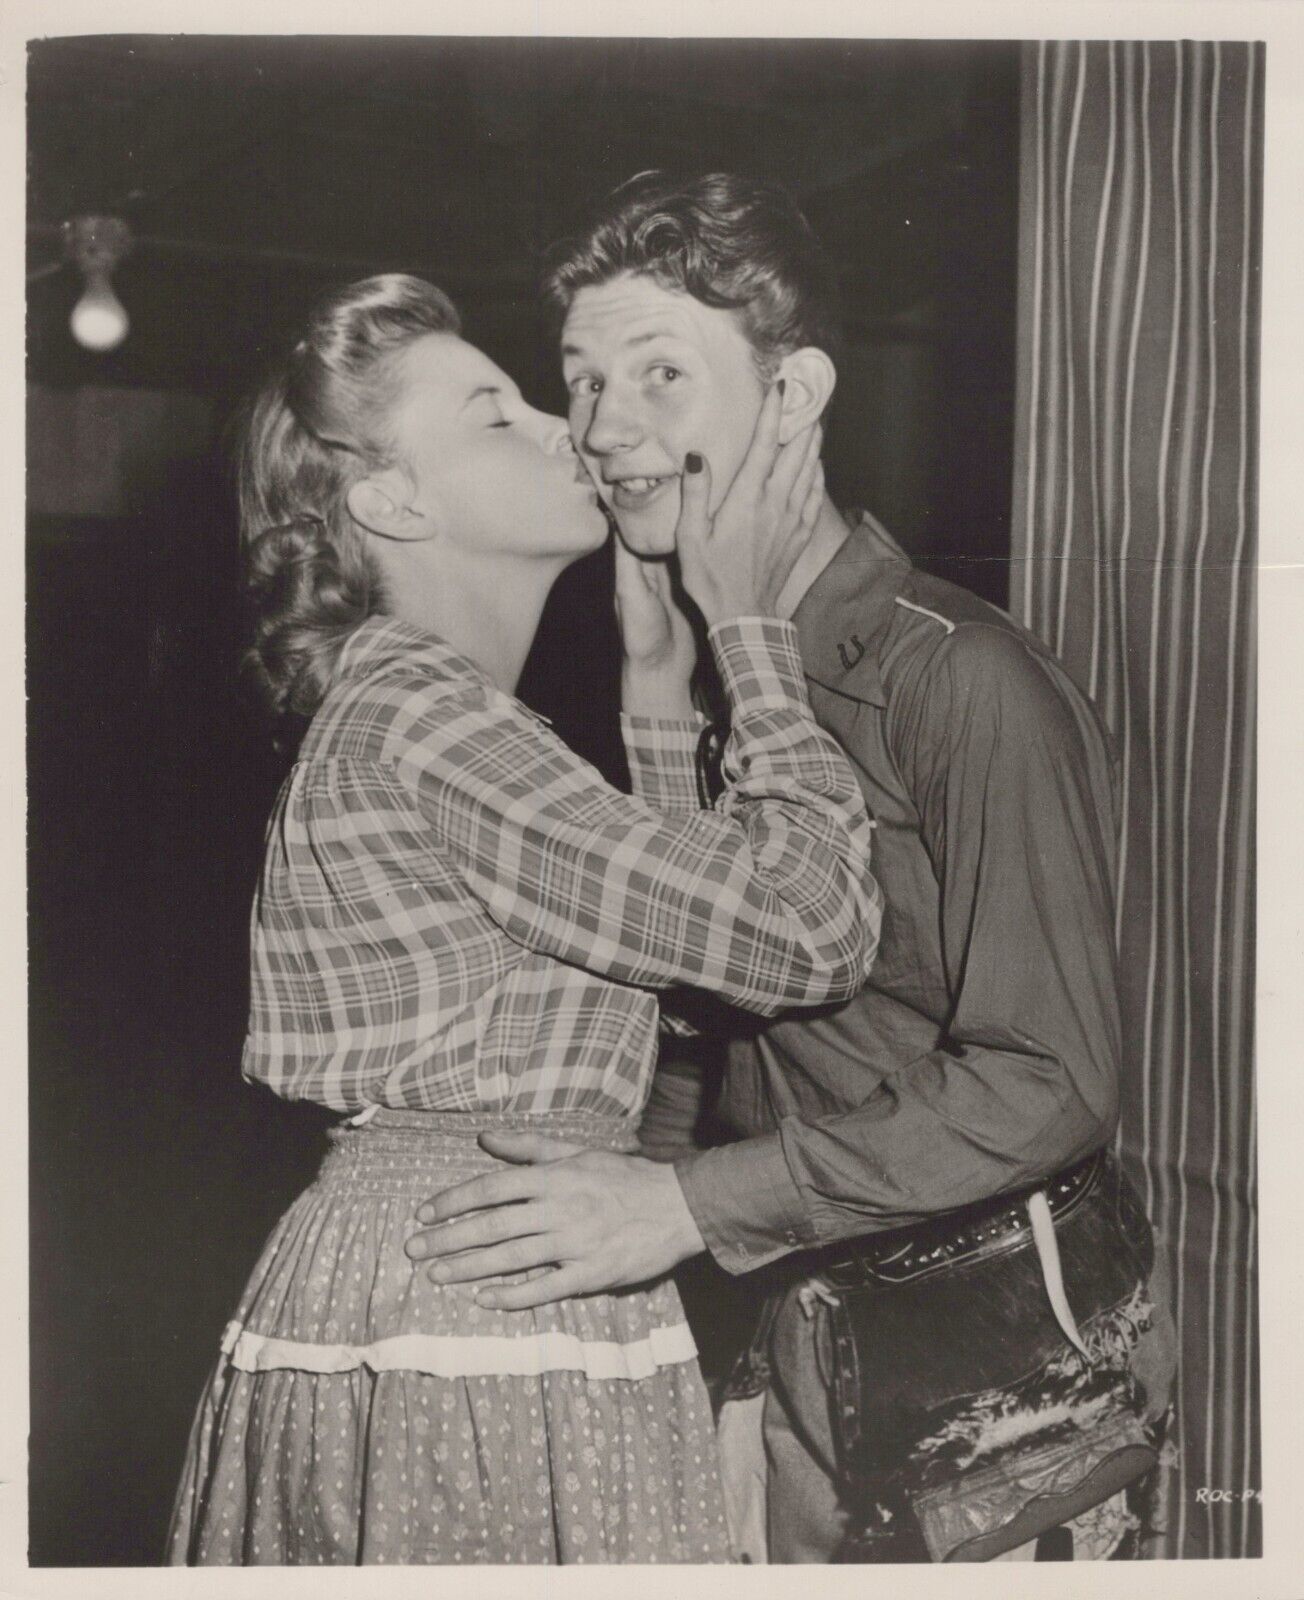 Judy Garland + Donald O'Connor (1950s) ❤️ Vintage Hollywood Photo K 511